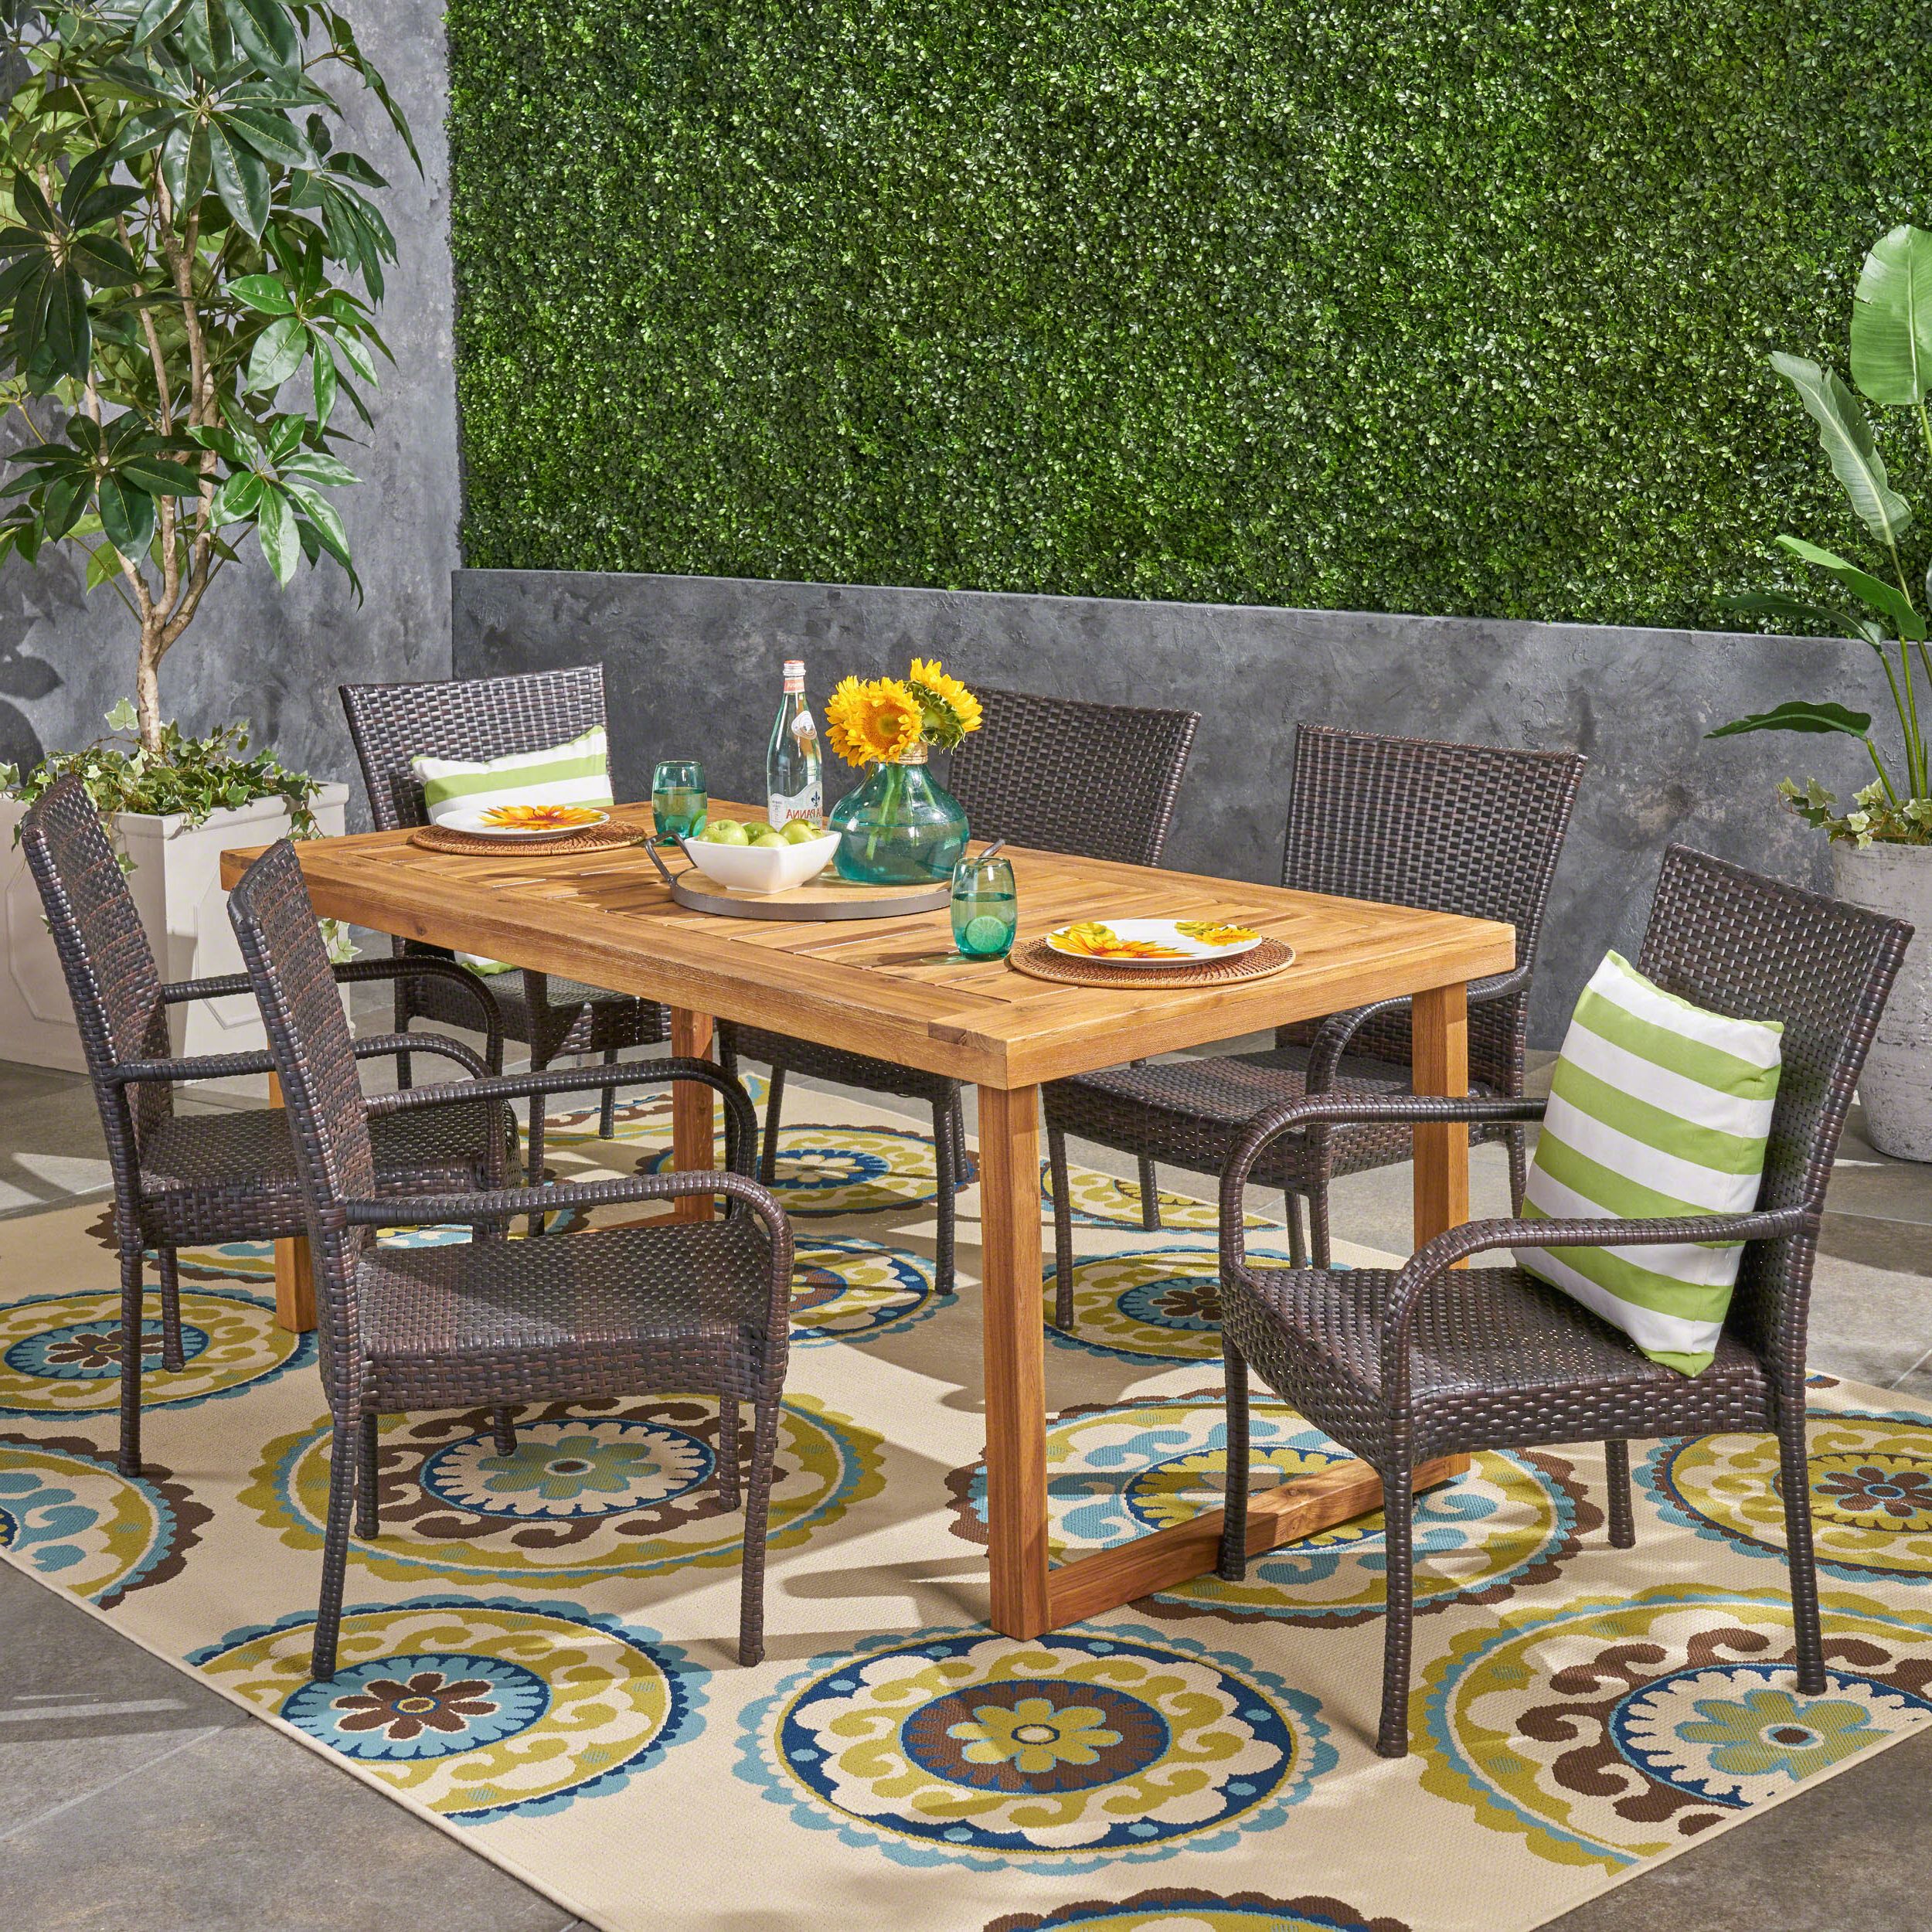 Natural Wood Outdoor Chairs Throughout Current Lisa Outdoor 7 Piece Acacia Wood Dining Set With Stacking Wicker Chairs (View 15 of 15)